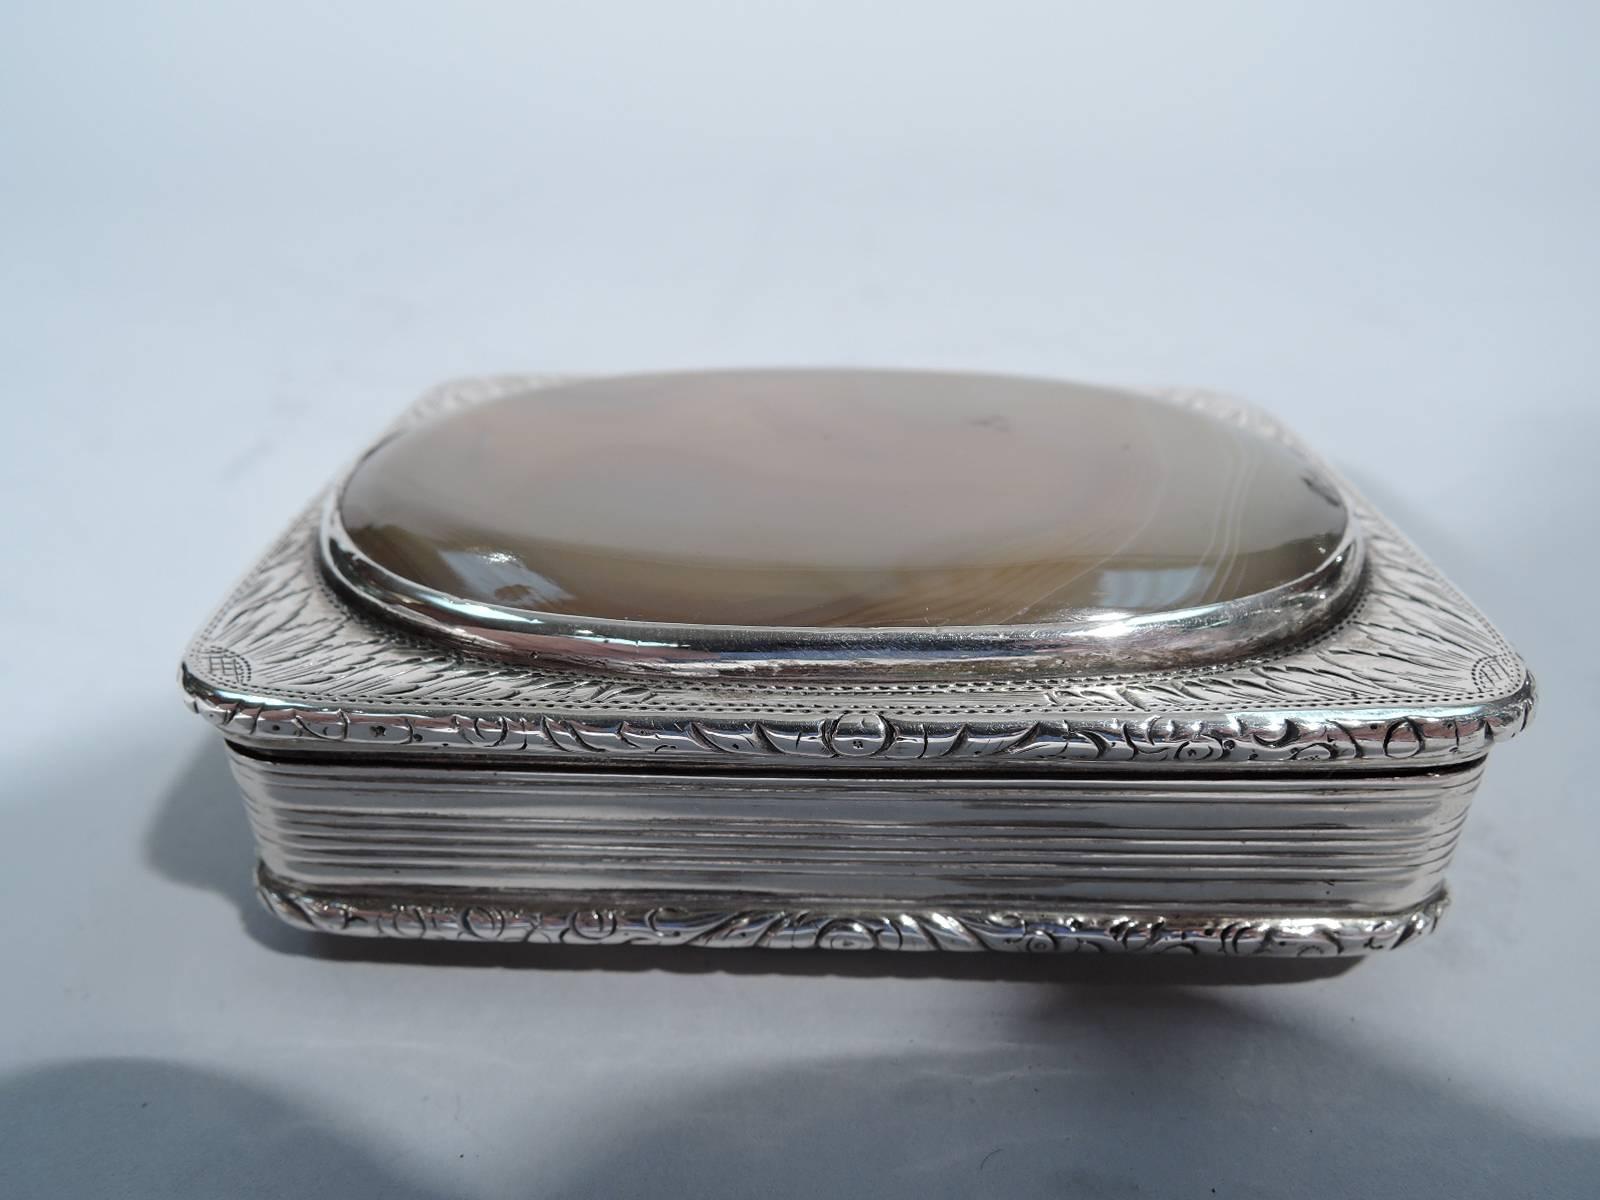 Georgian sterling silver snuff box. Made by Lawrence & Co. in Birmingham in 1822. Rectangular with inset reeded sides and hinged cover. Large oval agate plaques inset on cover and bottom bordered by engraved flower petals. Interior richly gilt.